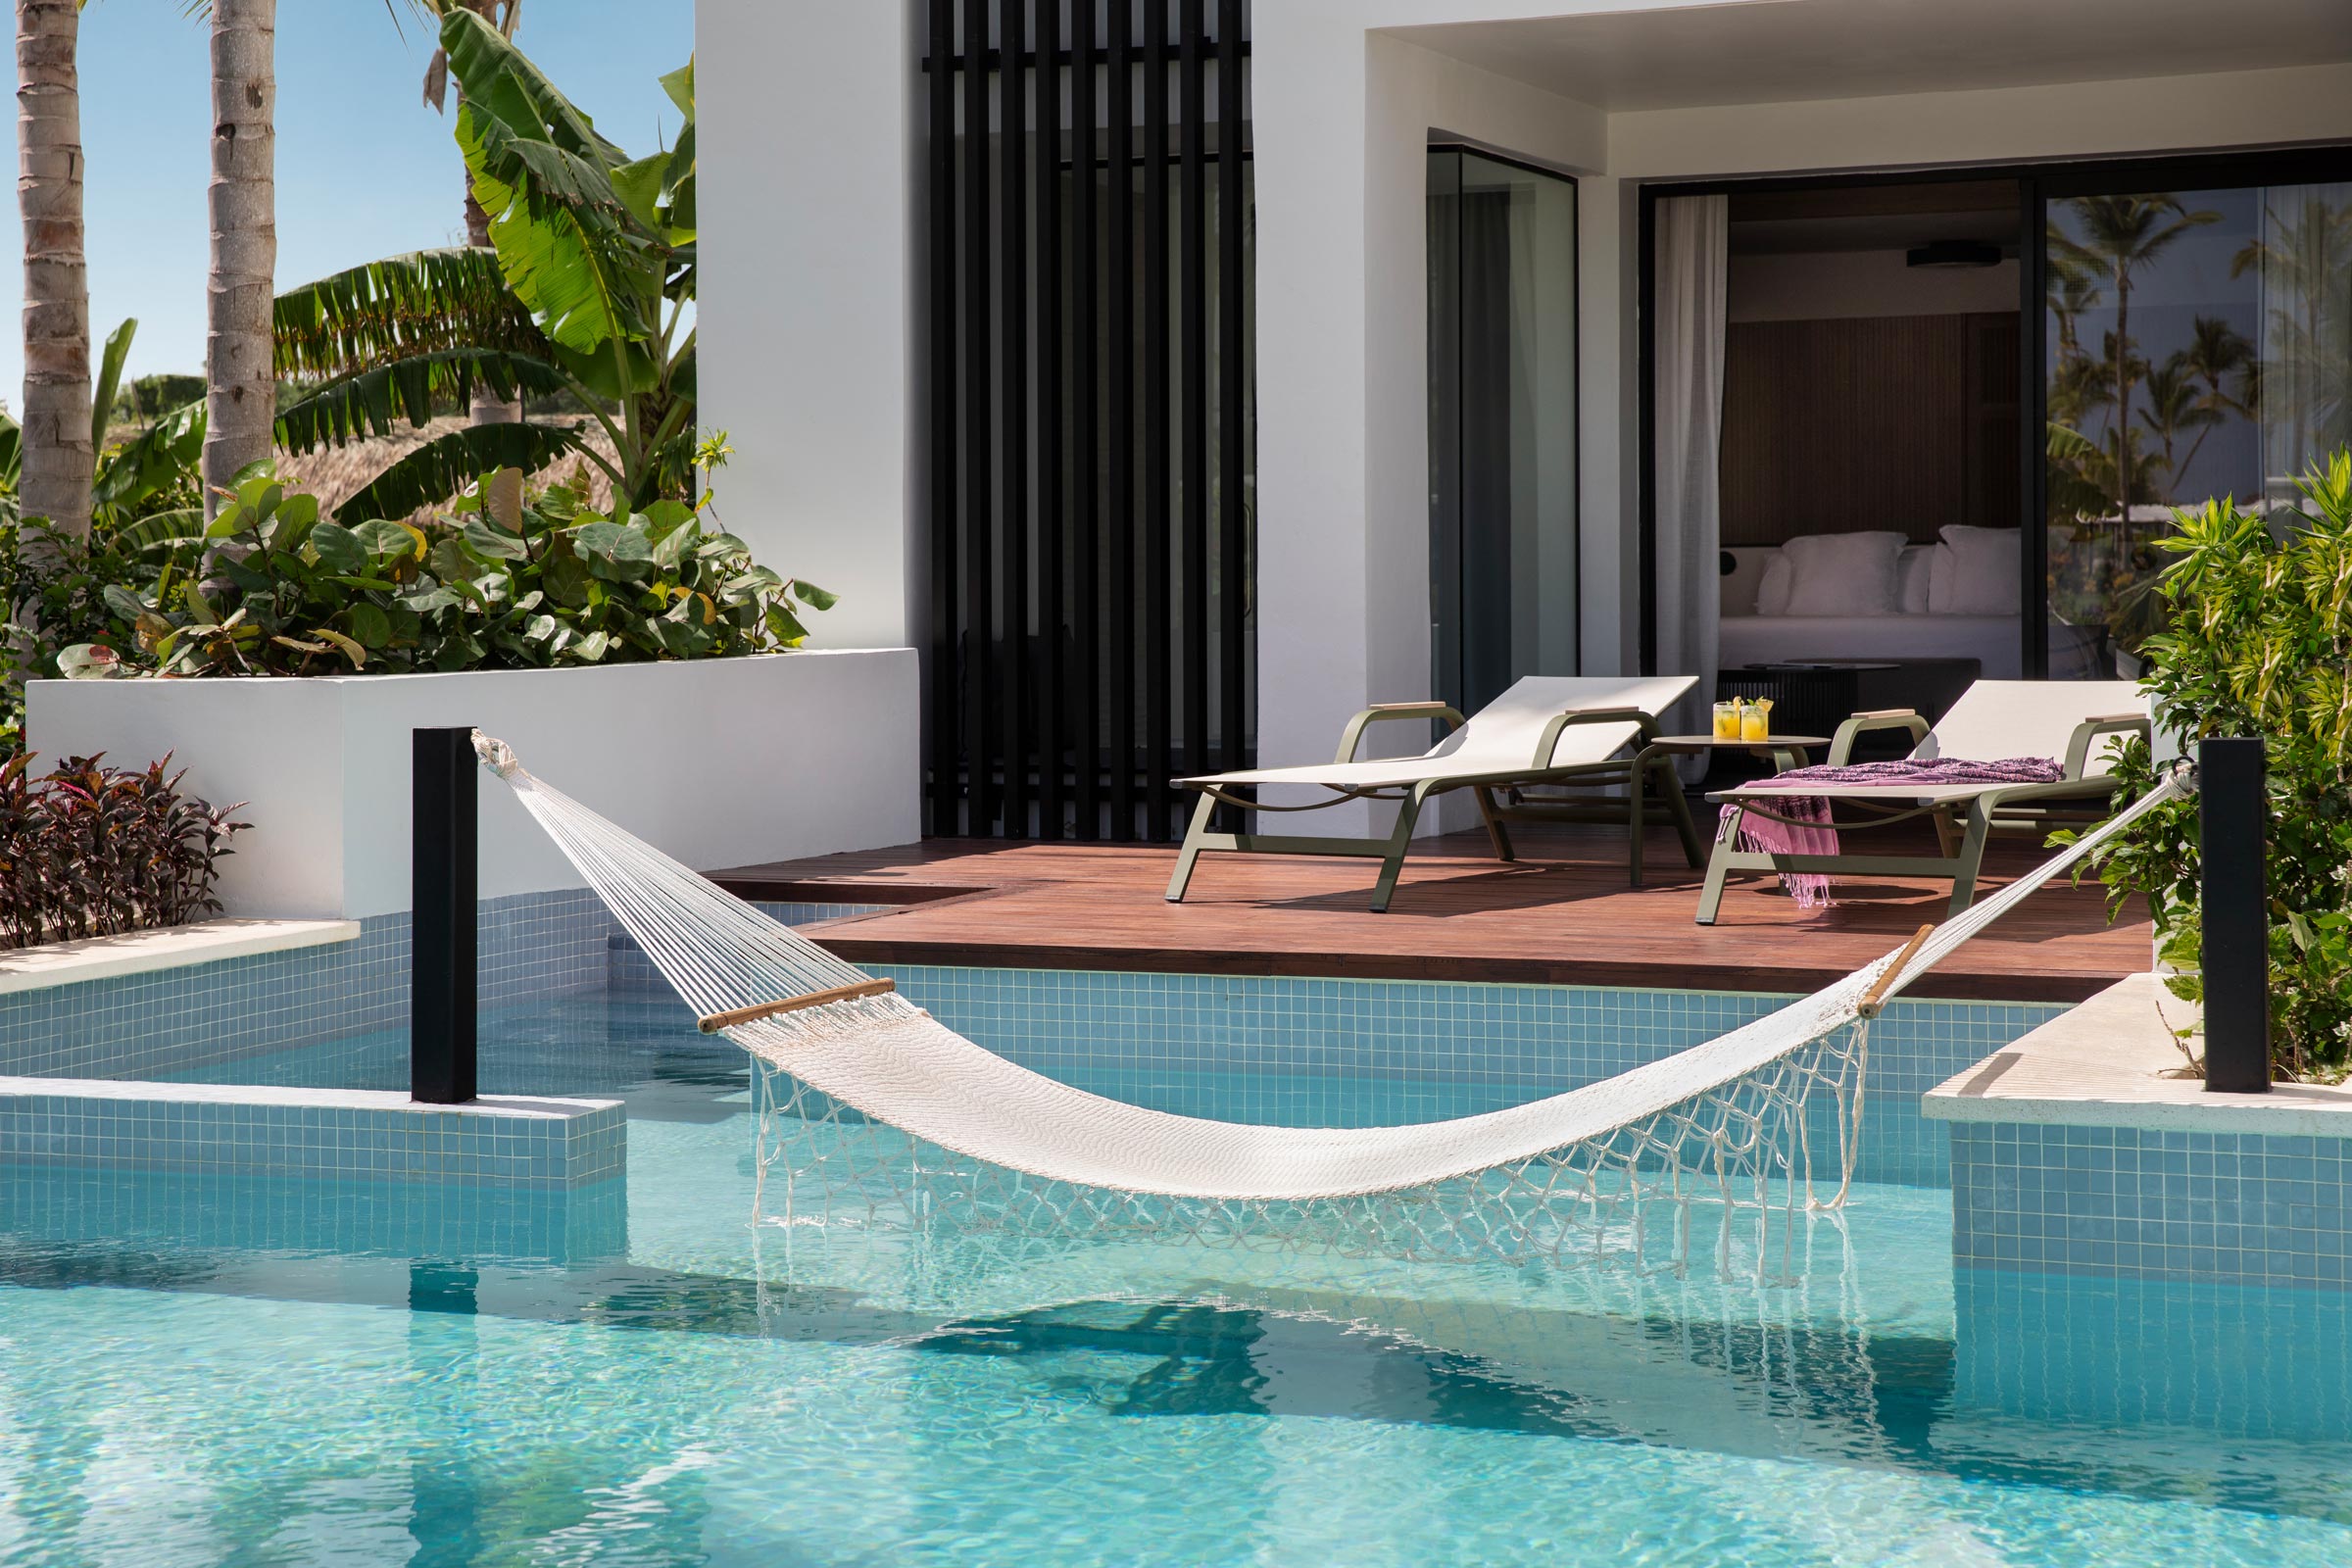 Enjoy our Junior Swim Up Suite in Finest Punta Cana